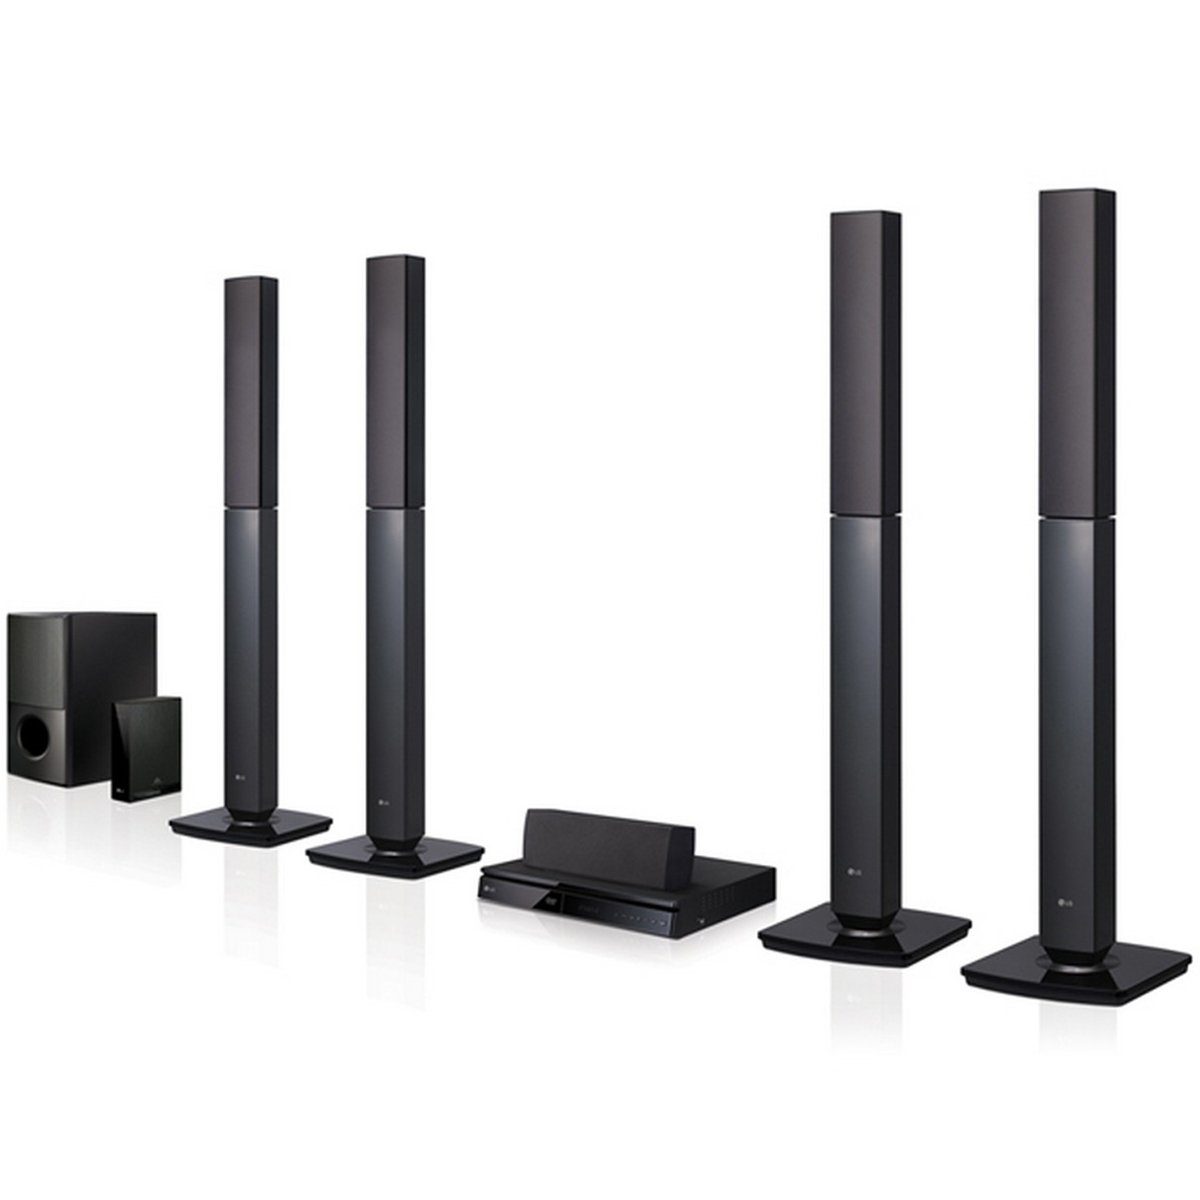 LG Home Theatre 5.1 Chanel LHD457